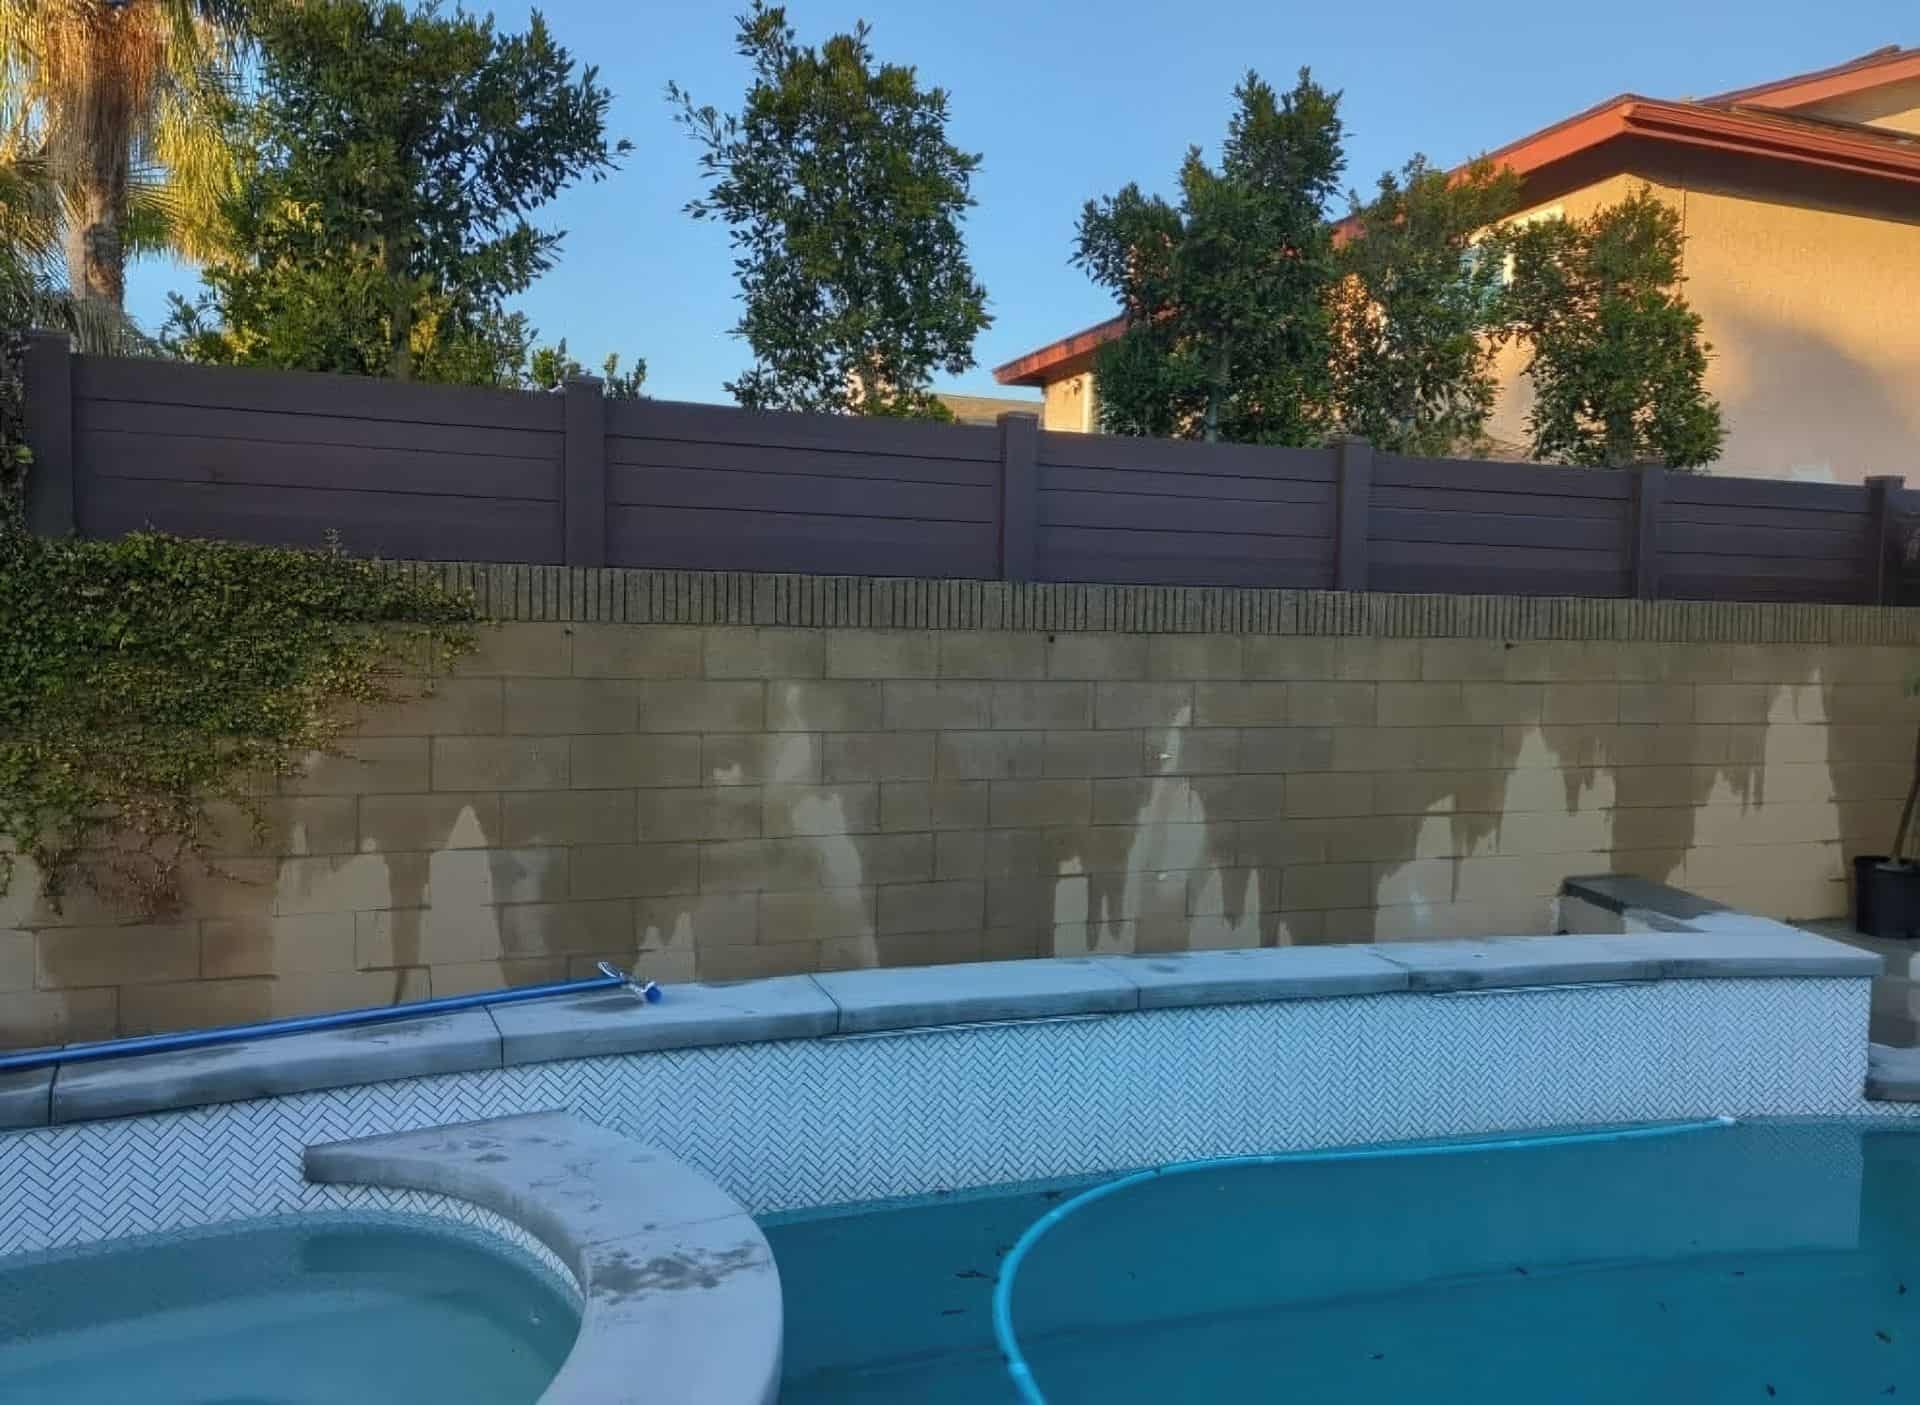 Vinyl custom wall topper adds charm to concrete wall, poolside oasis with lush trees in the background.